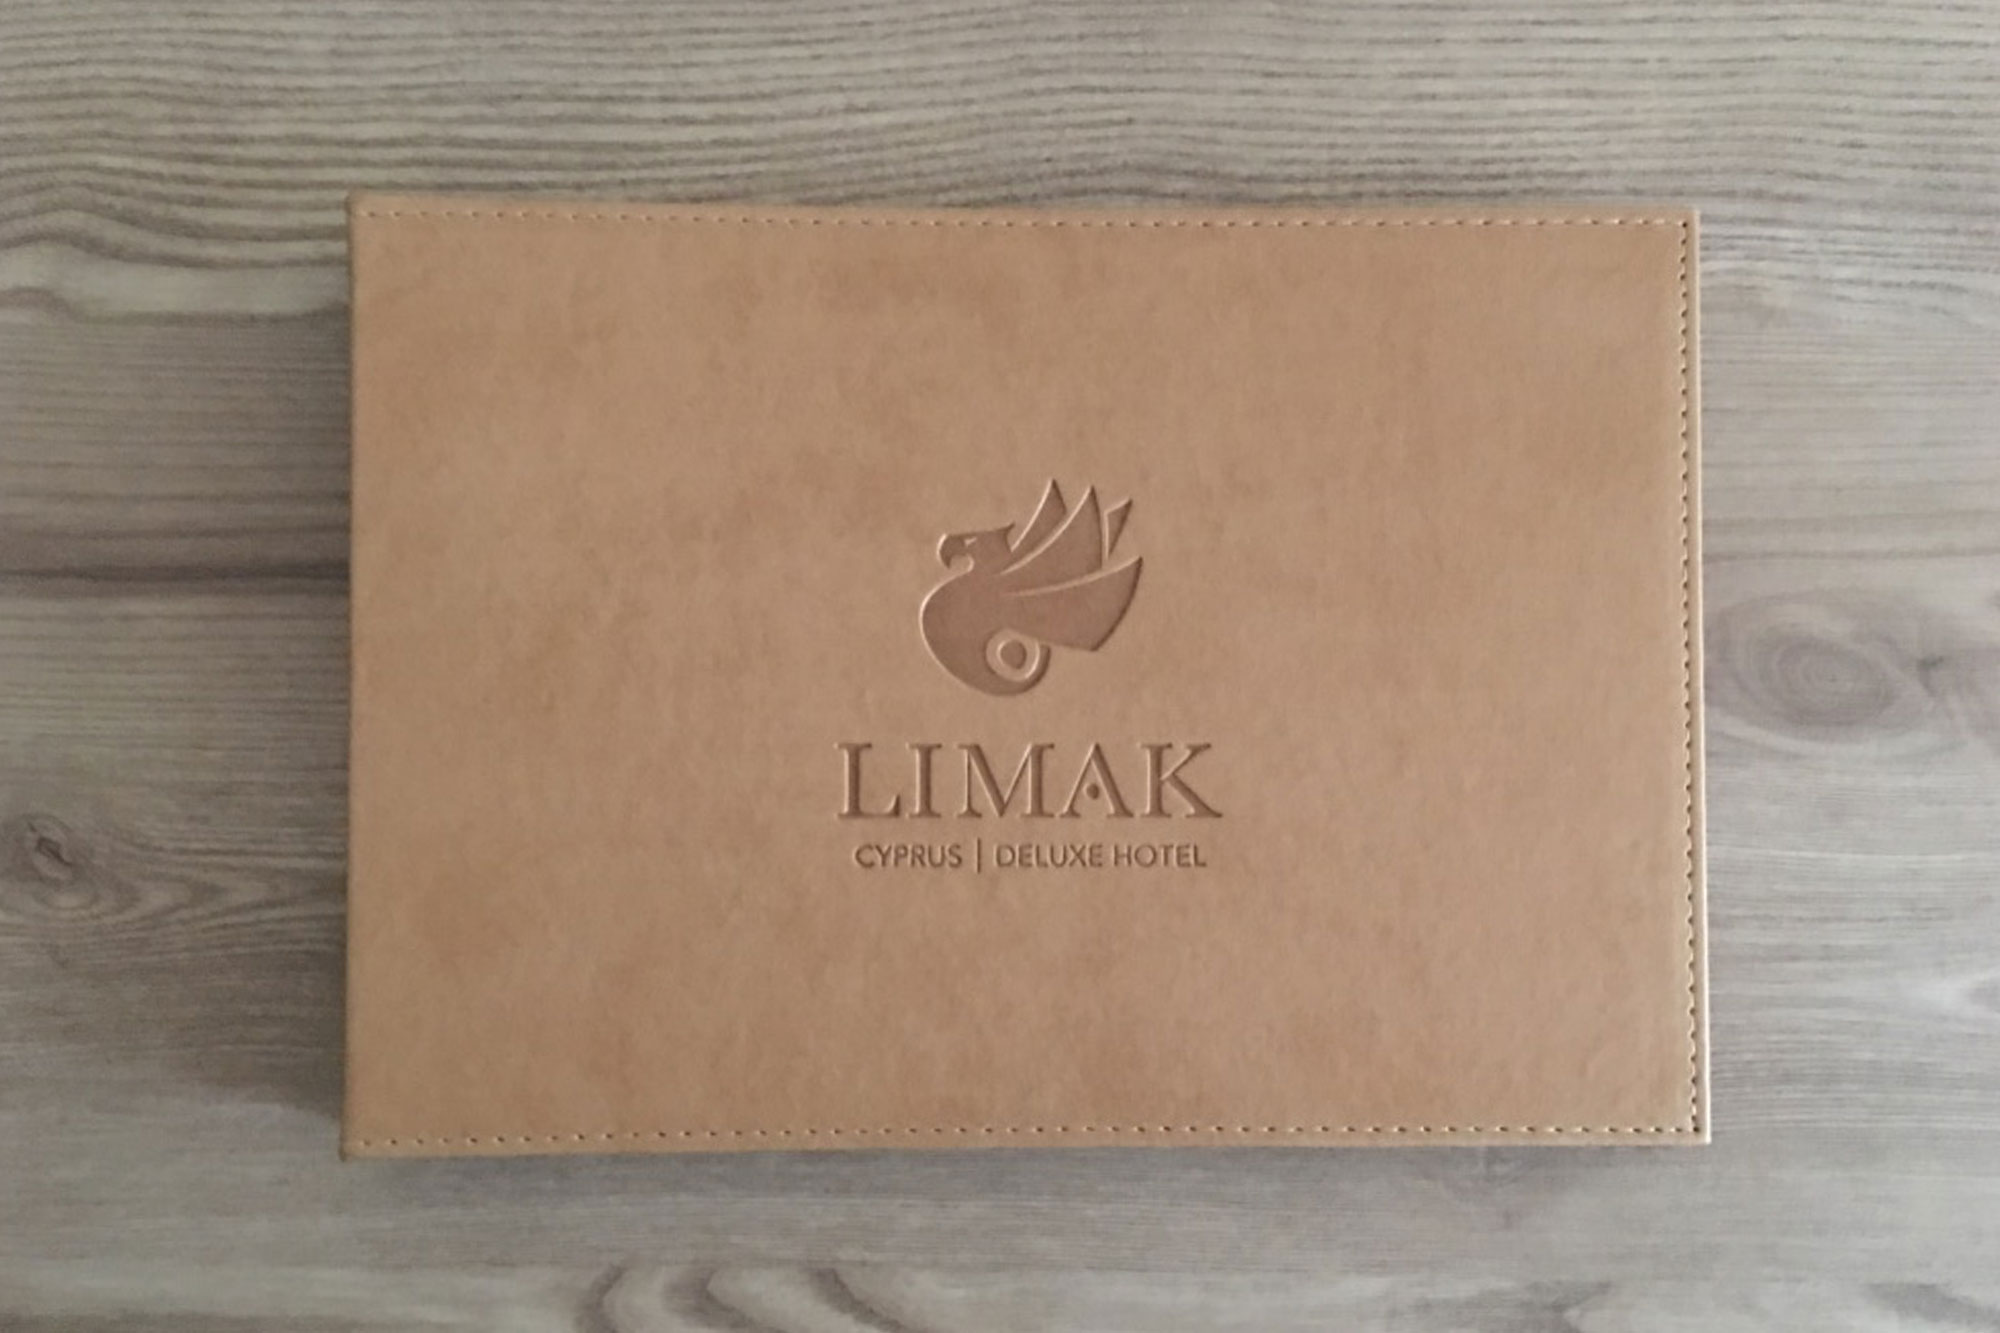 Limak Cyprus Deluxe Hotel Guide